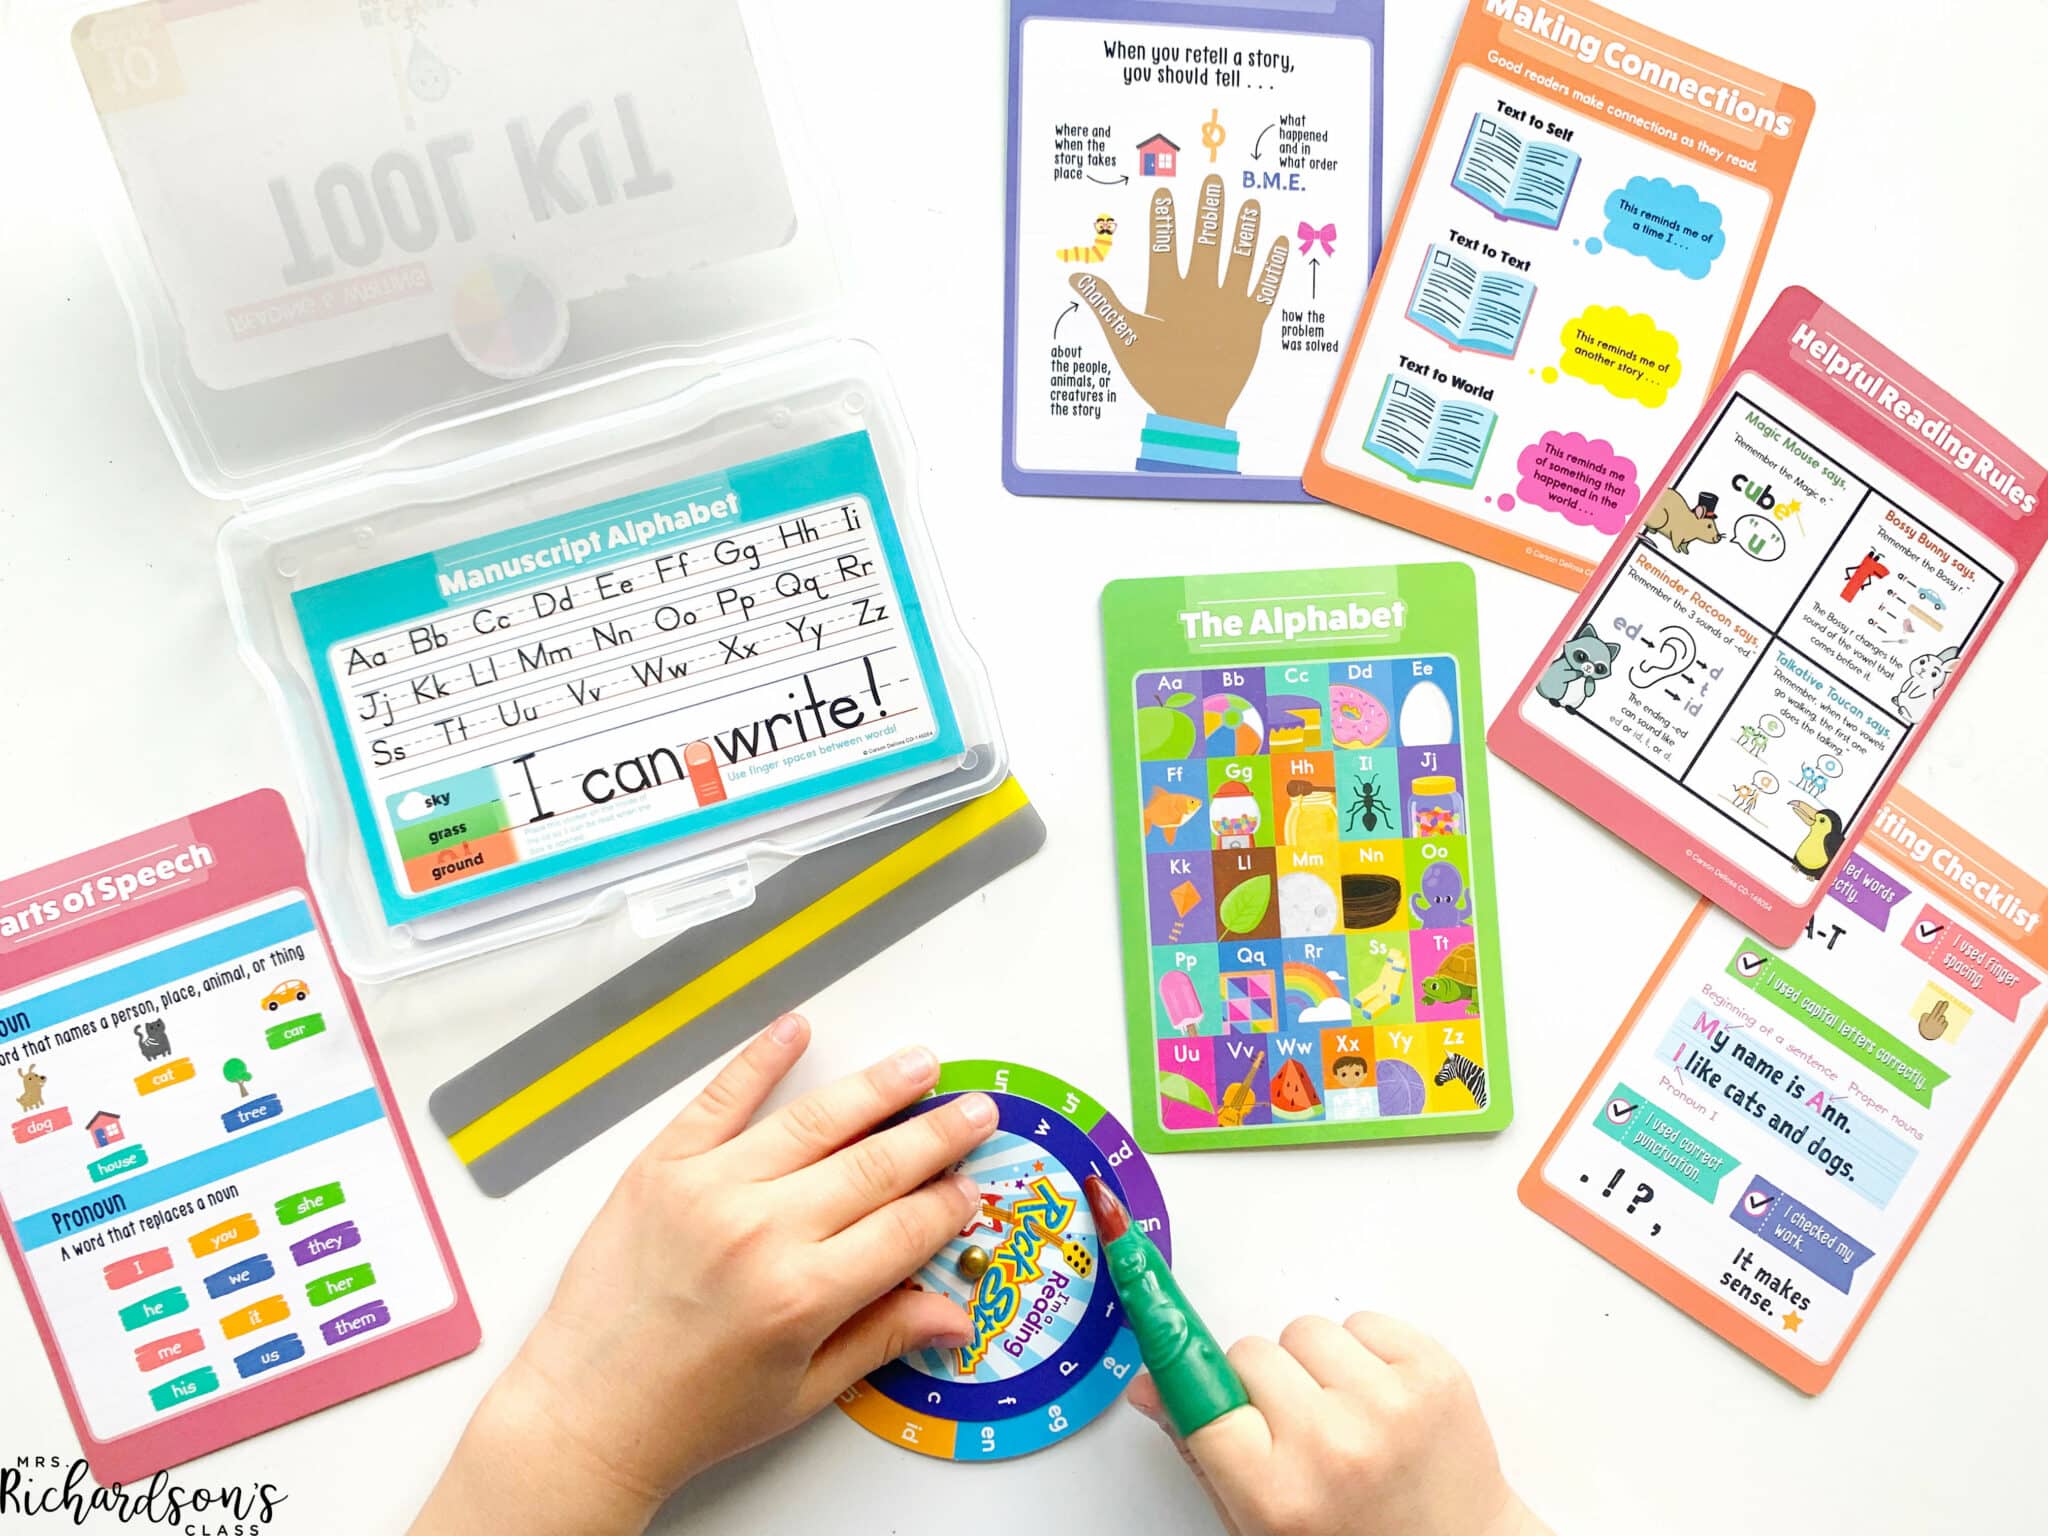 Phonics Manipulatives & Reading Tools to Support Literacy